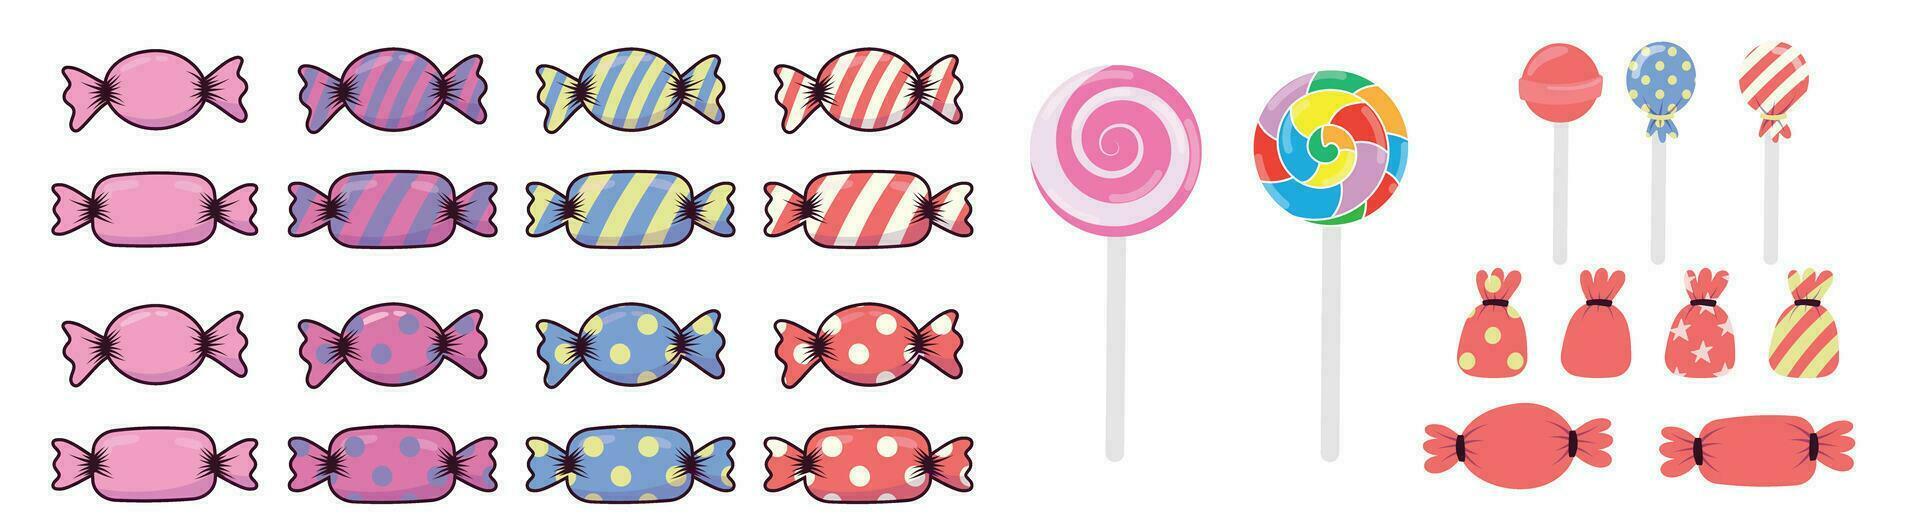 cute candies vector sweetcandy lollipop and chocolate